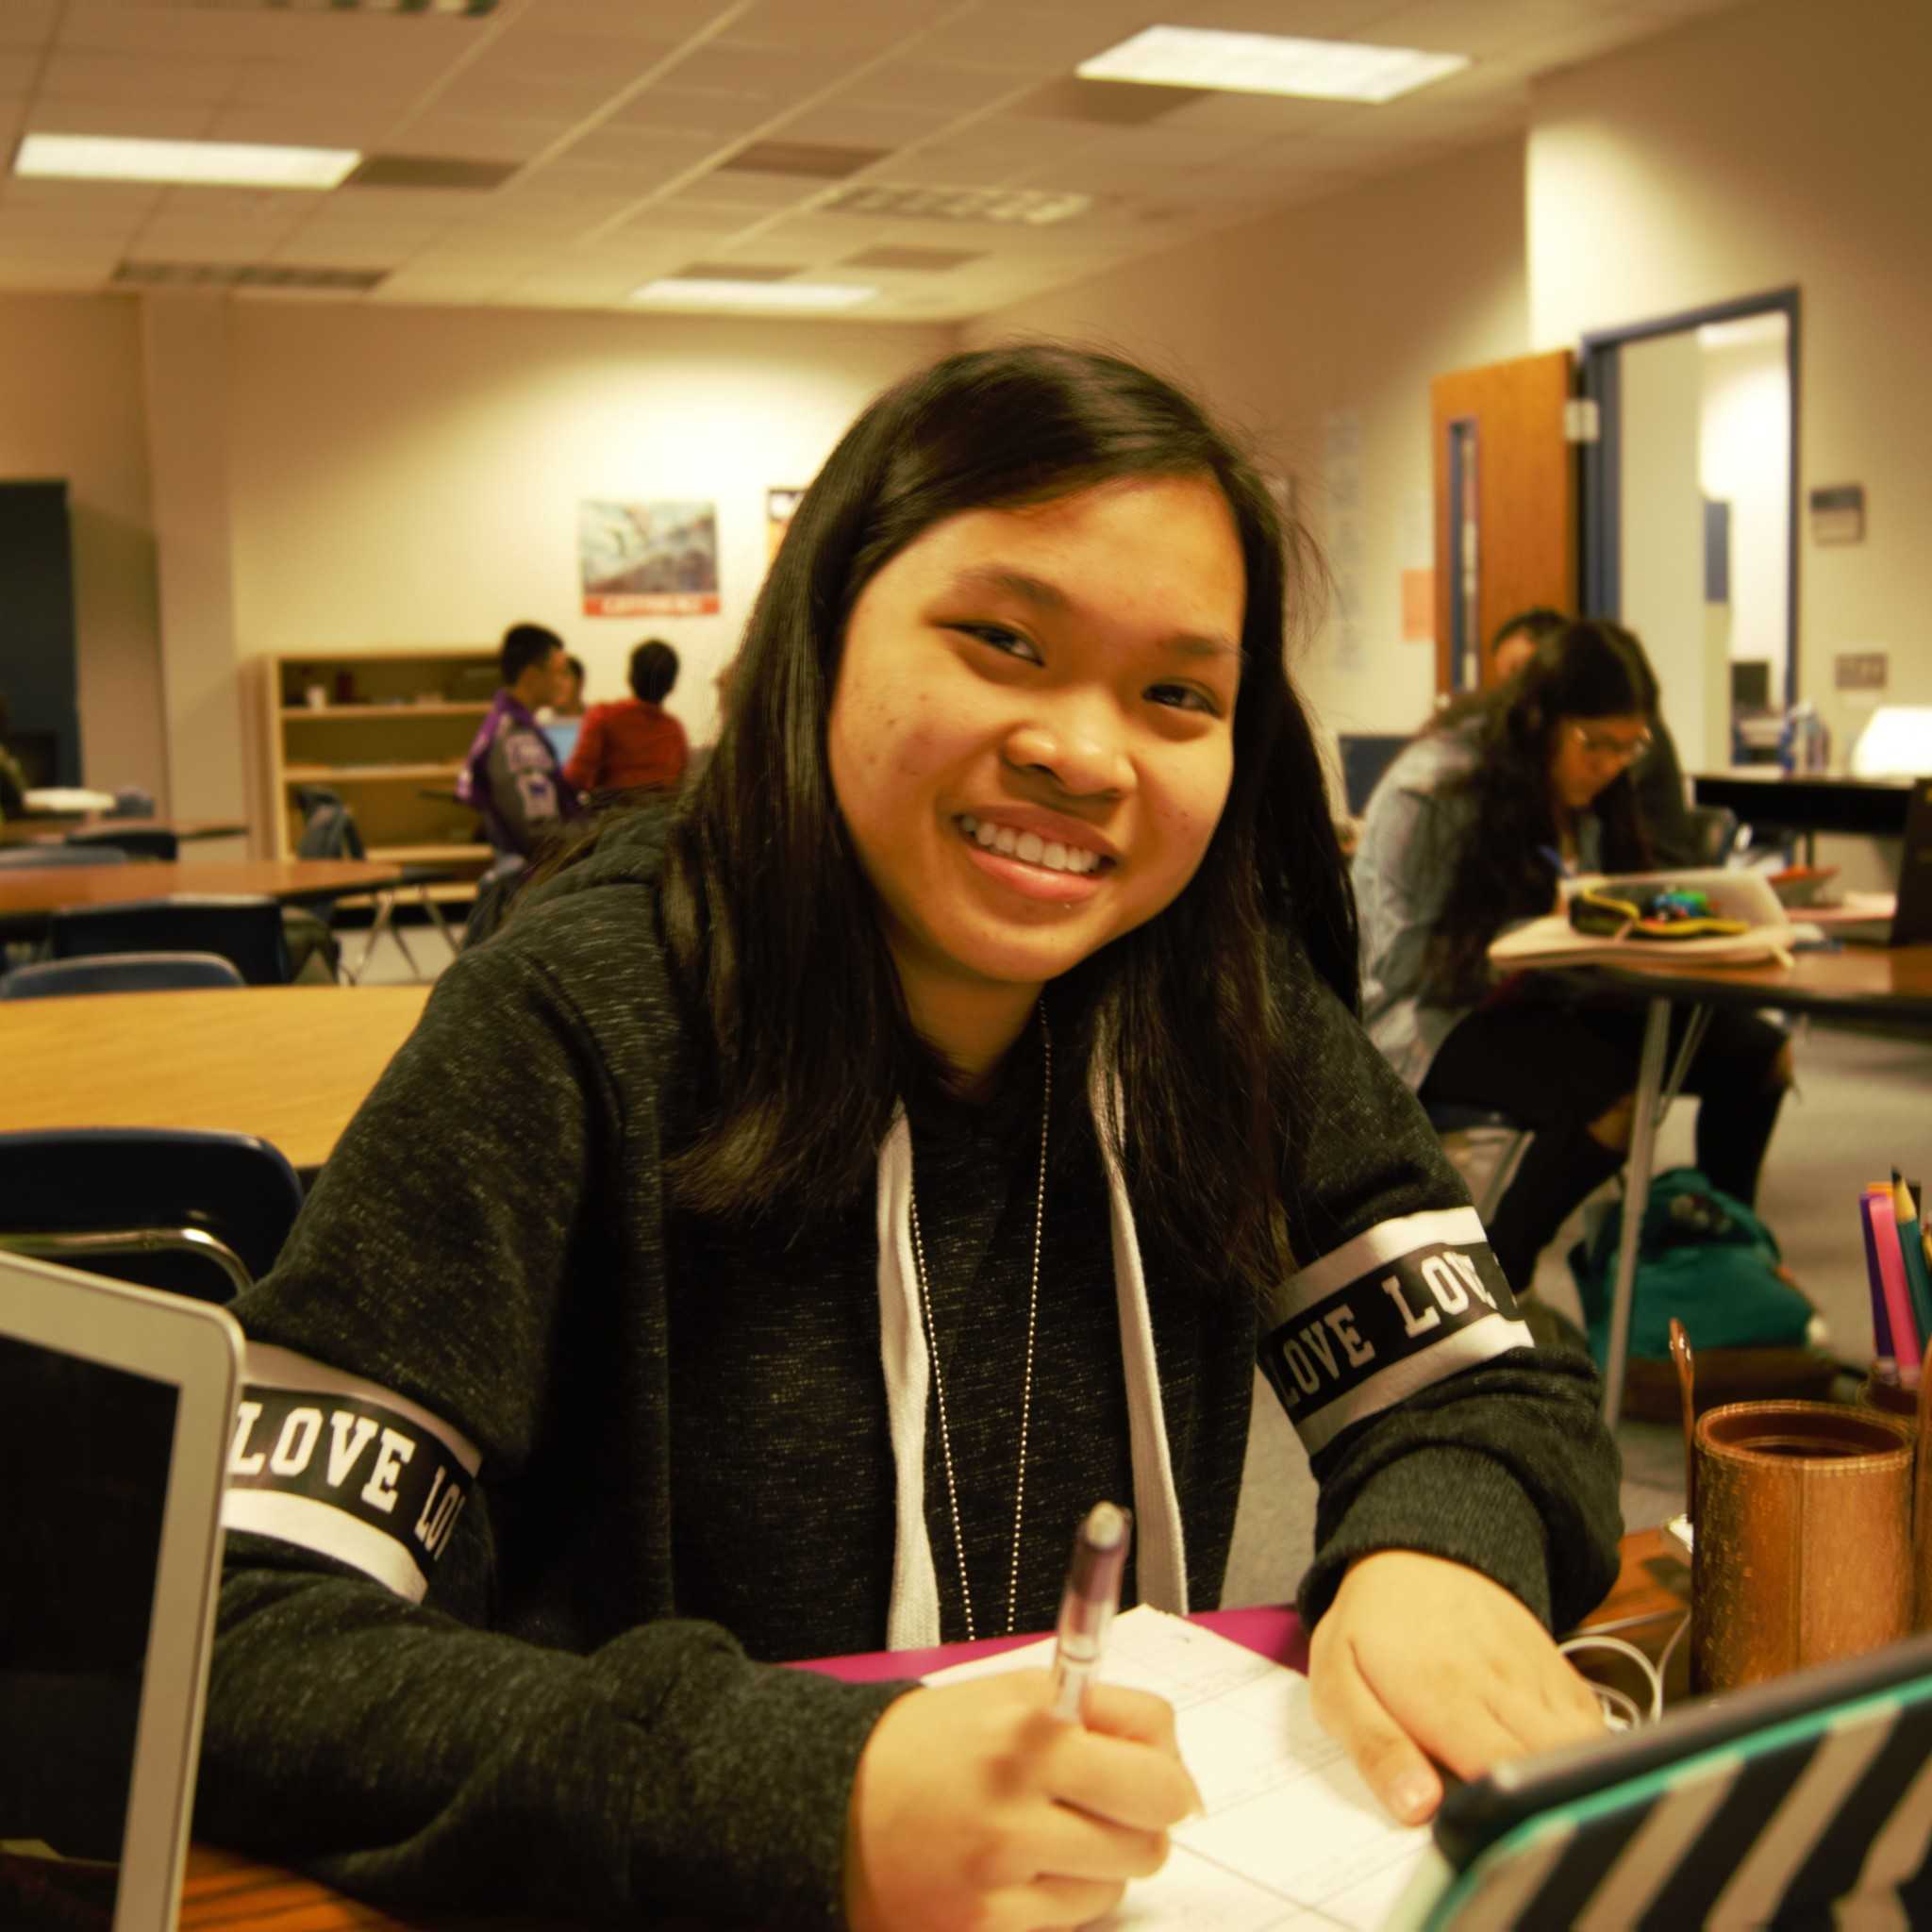 Vy Tran (Freshmen) says that her reason for waking up in the morning is because, "I wake up every morning to see my friends and my family, because I don't think I'd be the person I am right now without them supporting me... and not being lonely."